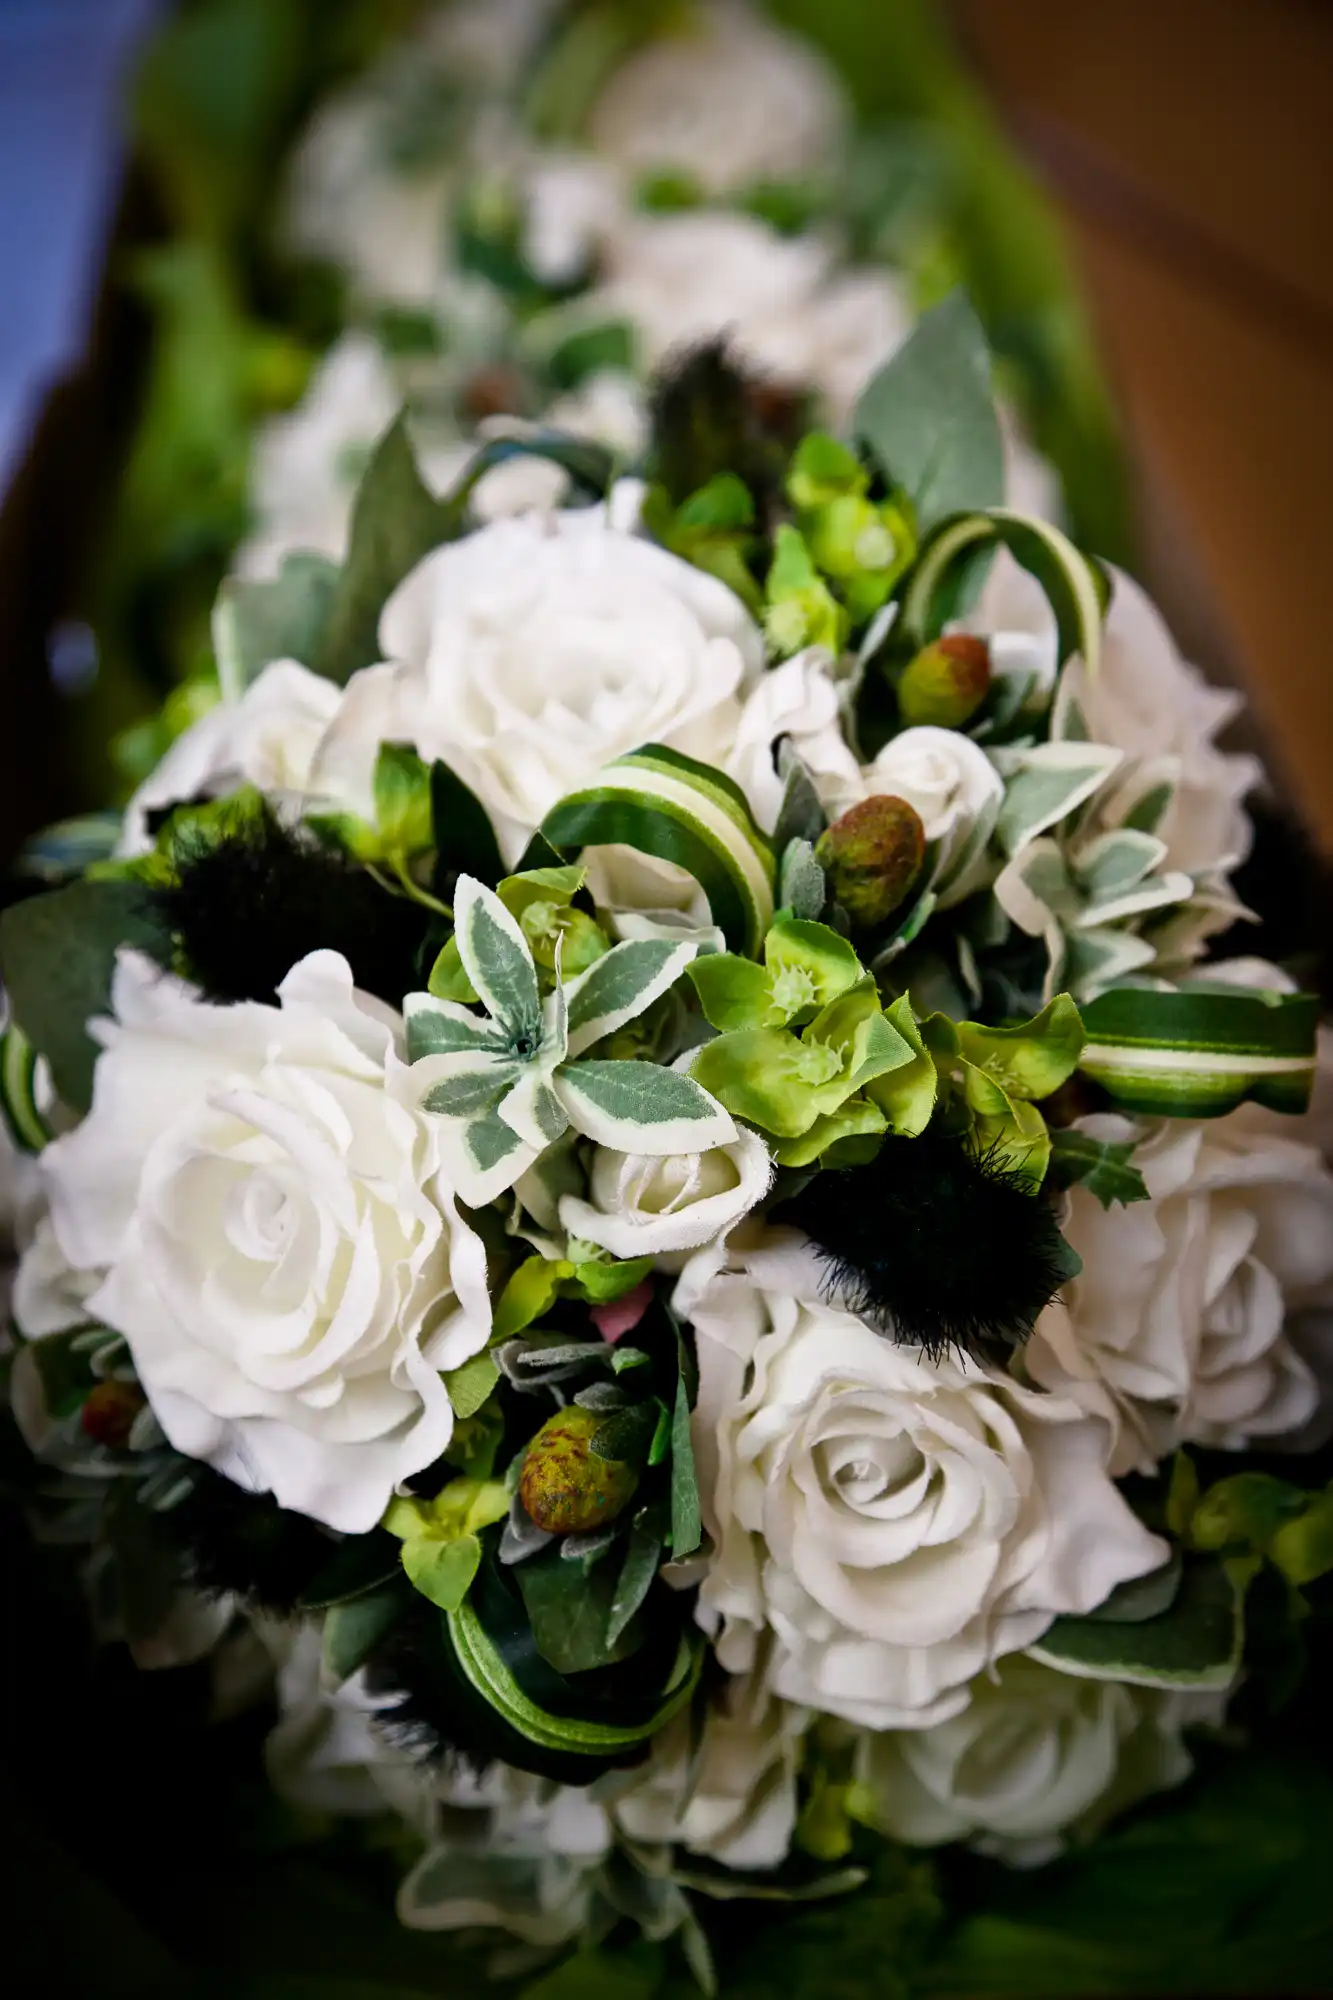 Close-up of a bouquet featuring white roses, green leaves, and fuzzy black details, with a blurred background.